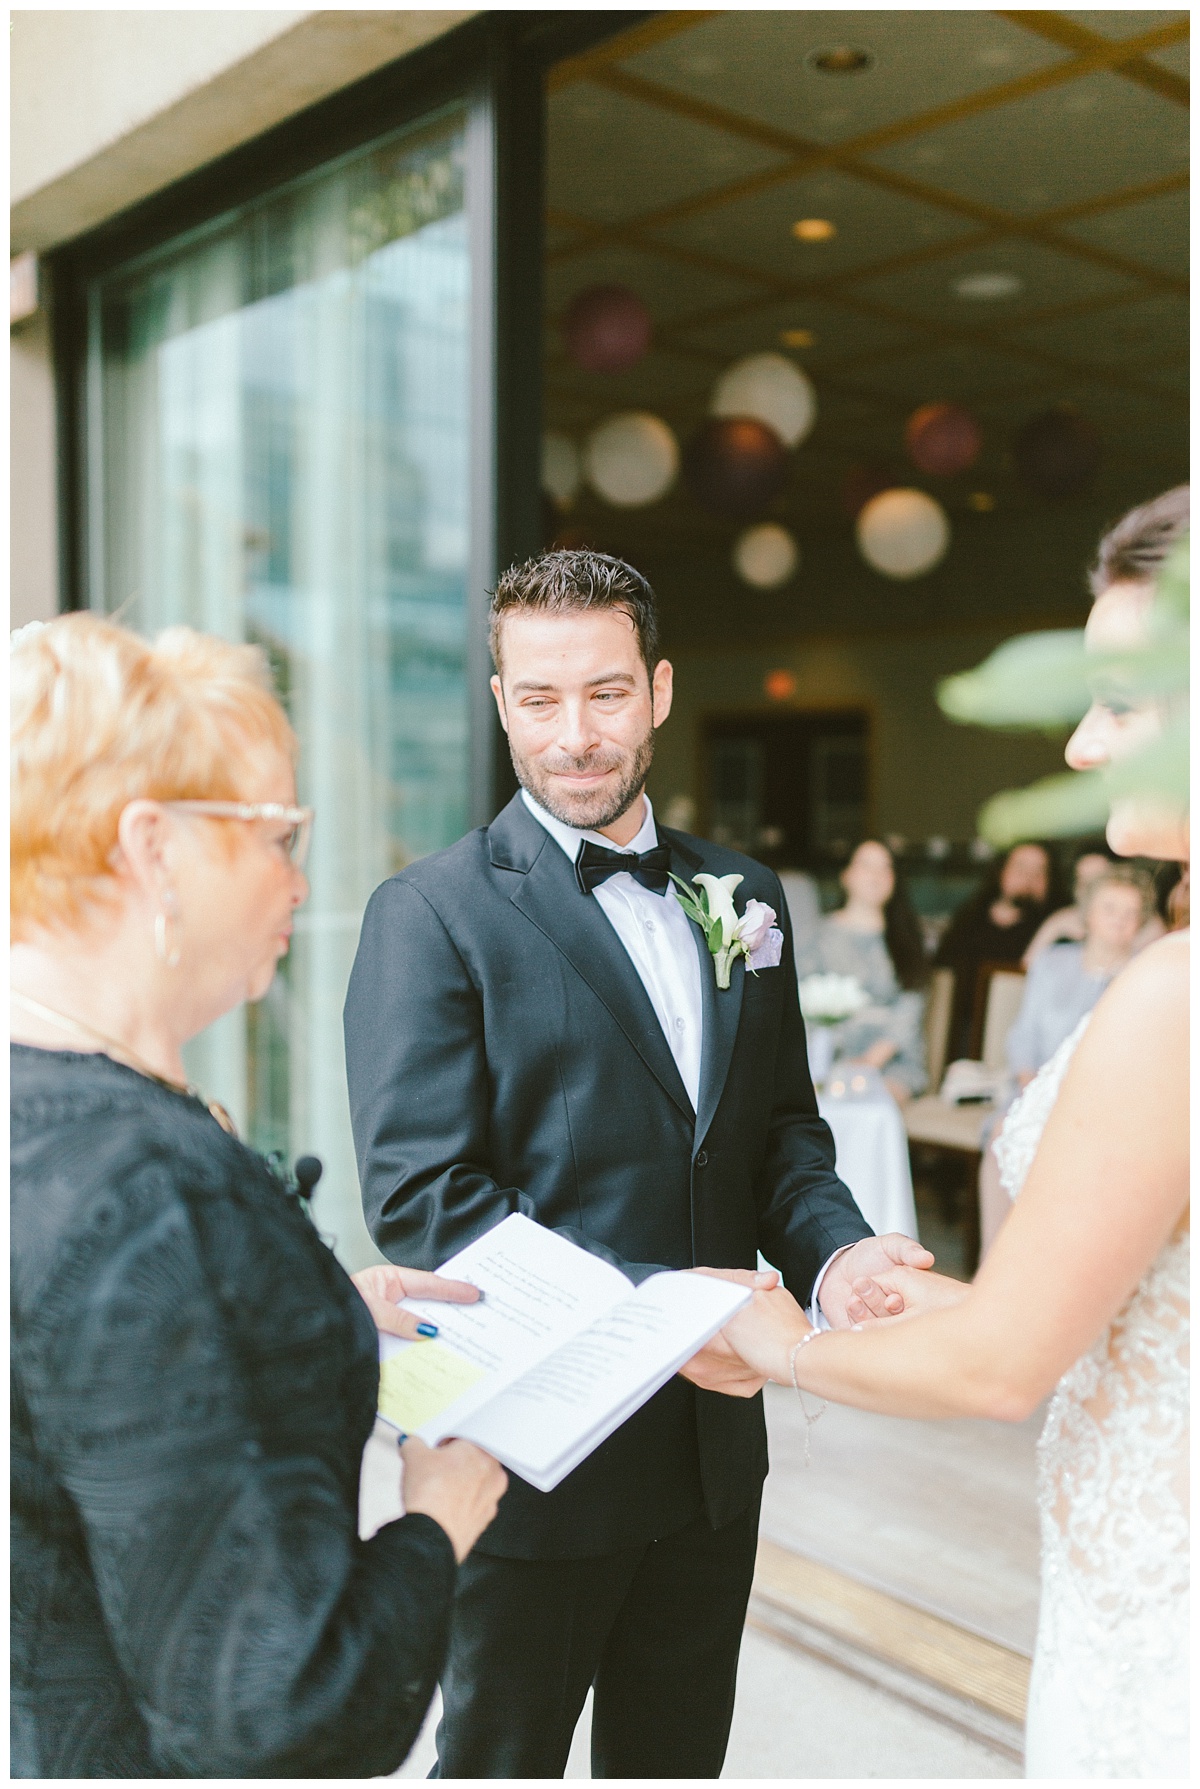  Wedding ceremony at Law Courts Inn, Vancouver 